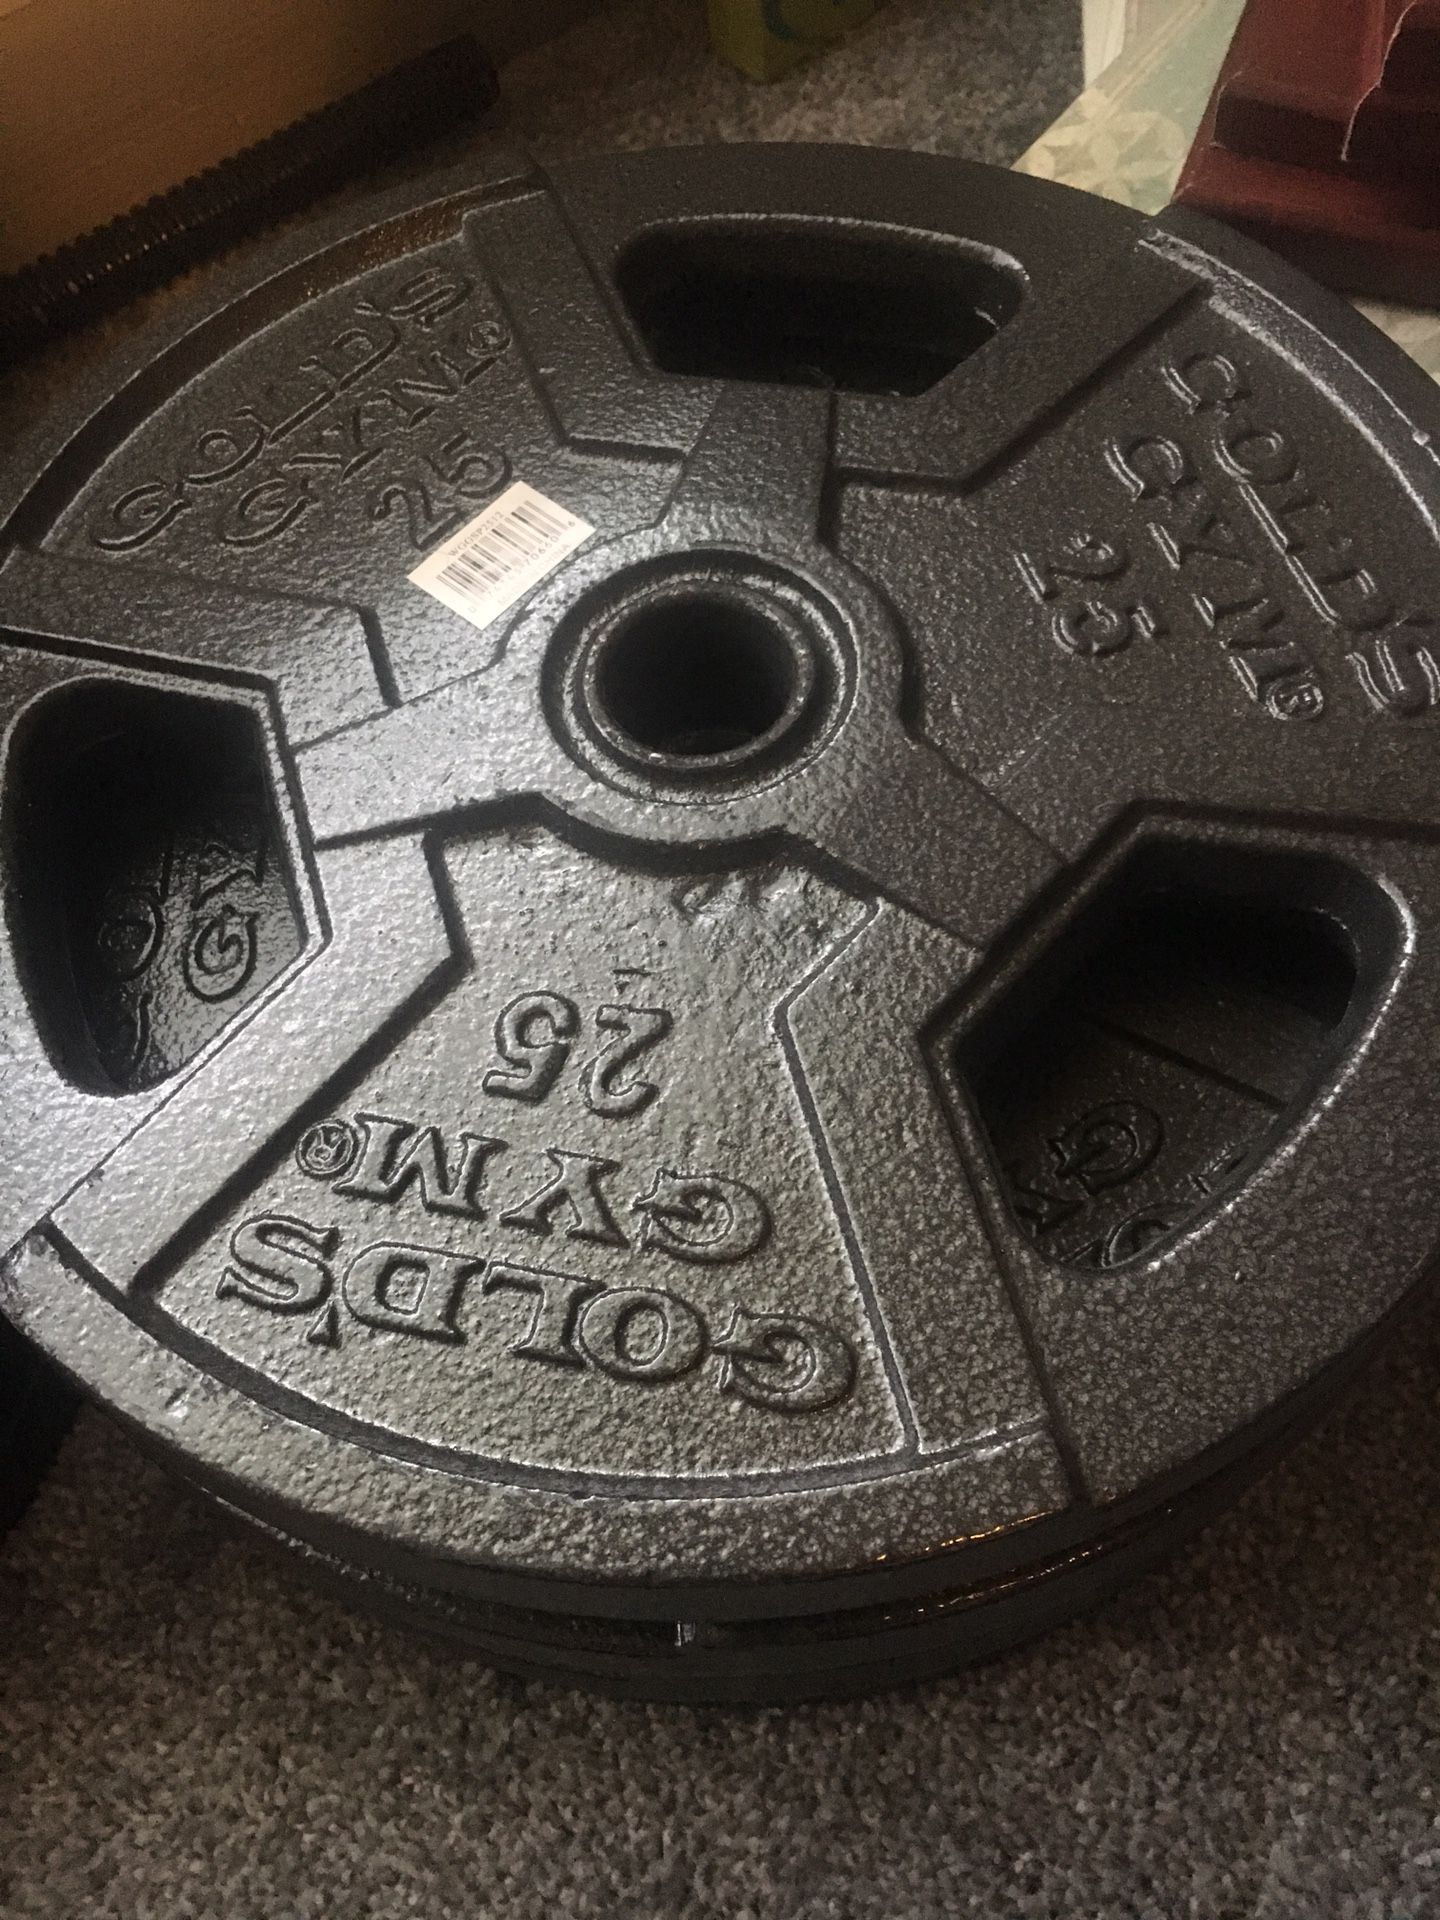 25 lb weight plates